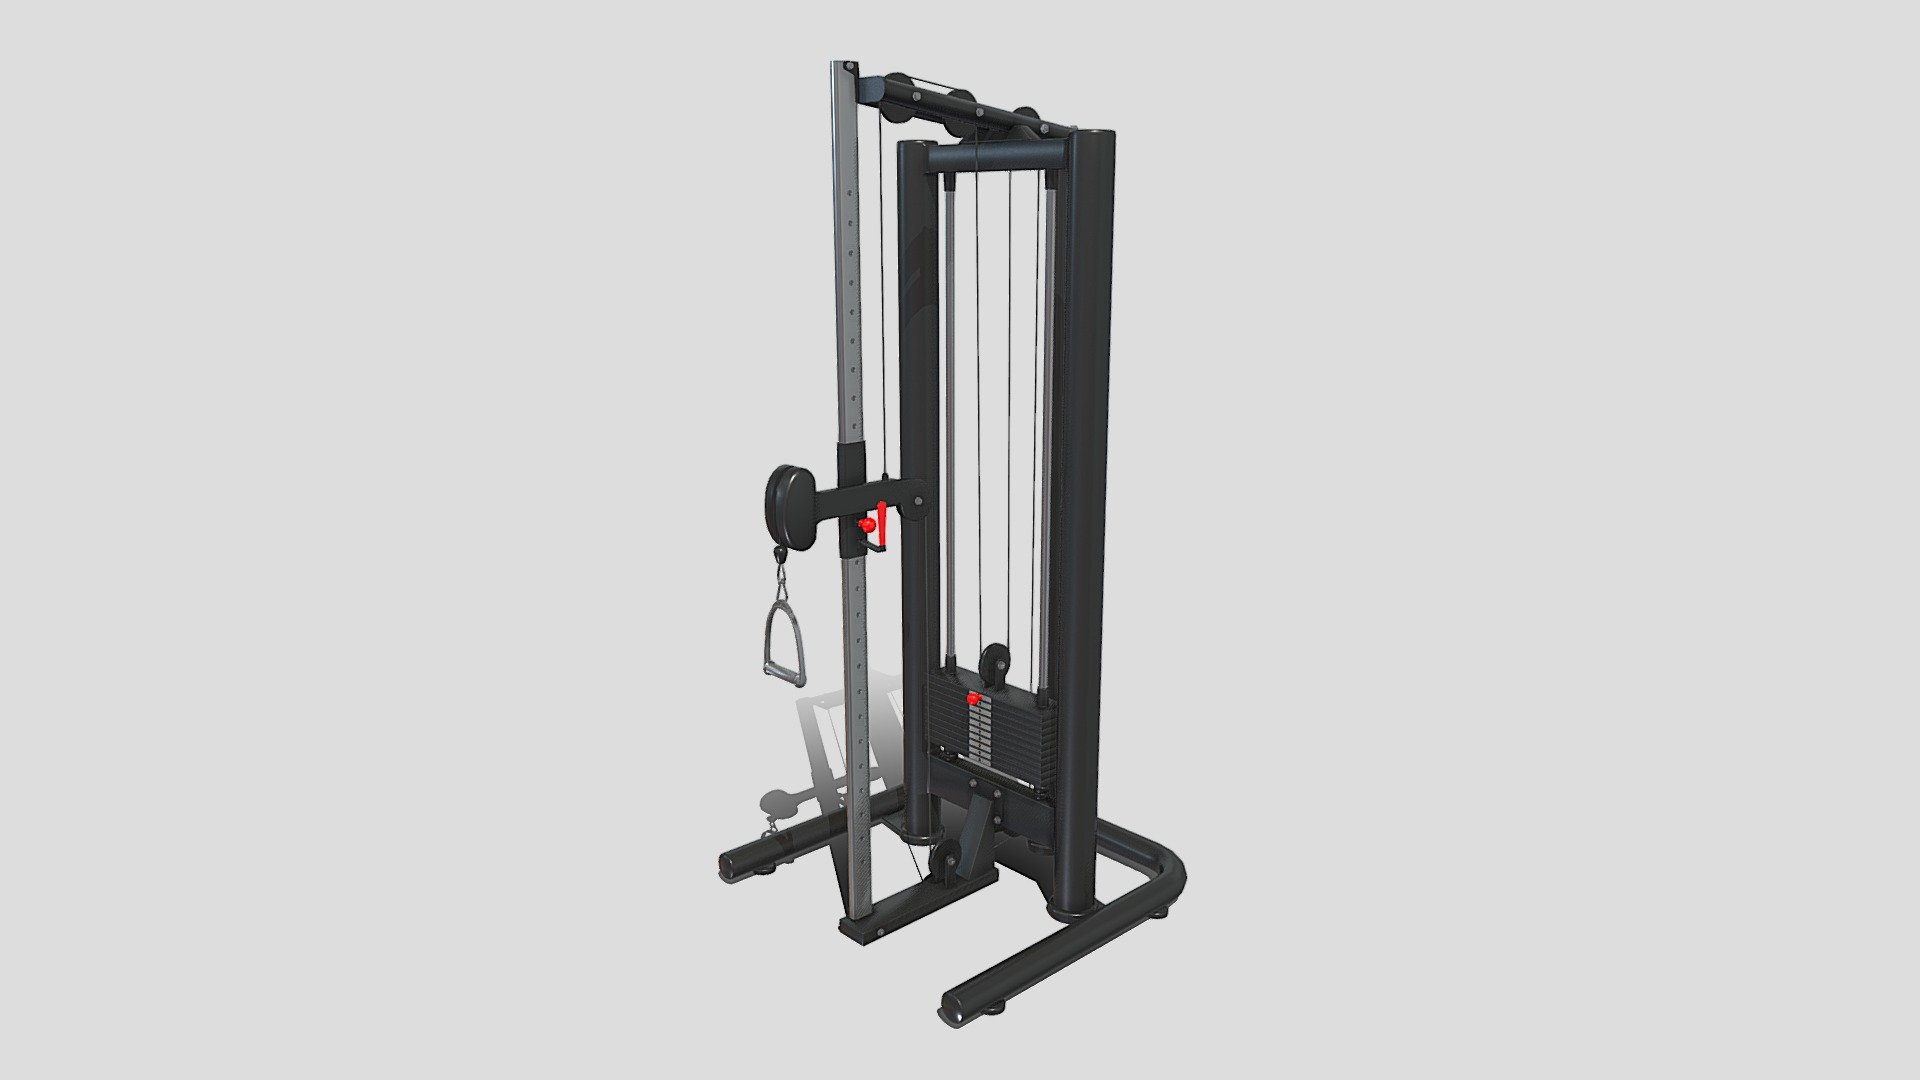 Gym machine 3d model built to real size, rendered with Cycles in Blender, as per seen on attached images. 

File formats:
-.blend, rendered with cycles, as seen in the images;
-.obj, with materials applied;
-.dae, with materials applied;
-.fbx, with materials applied;
-.stl;

Files come named appropriately and split by file format.

3D Software:
The 3D model was originally created in Blender 3.1 and rendered with Cycles.

Materials and textures:
The models have materials applied in all formats, and are ready to import and render.
Materials are image based using PBR, the model comes with four 4k png image textures.

Preview scenes:
The preview images are rendered in Blender using its built-in render engine &lsquo;Cycles'.
Note that the blend files come directly with the rendering scene included and the render command will generate the exact result as seen in previews.

General:
The models are built mostly out of quads.

For any problems please feel free to contact me.

Don't forget to rate and enjoy! - High Low Pulley - Buy Royalty Free 3D model by dragosburian 3d model